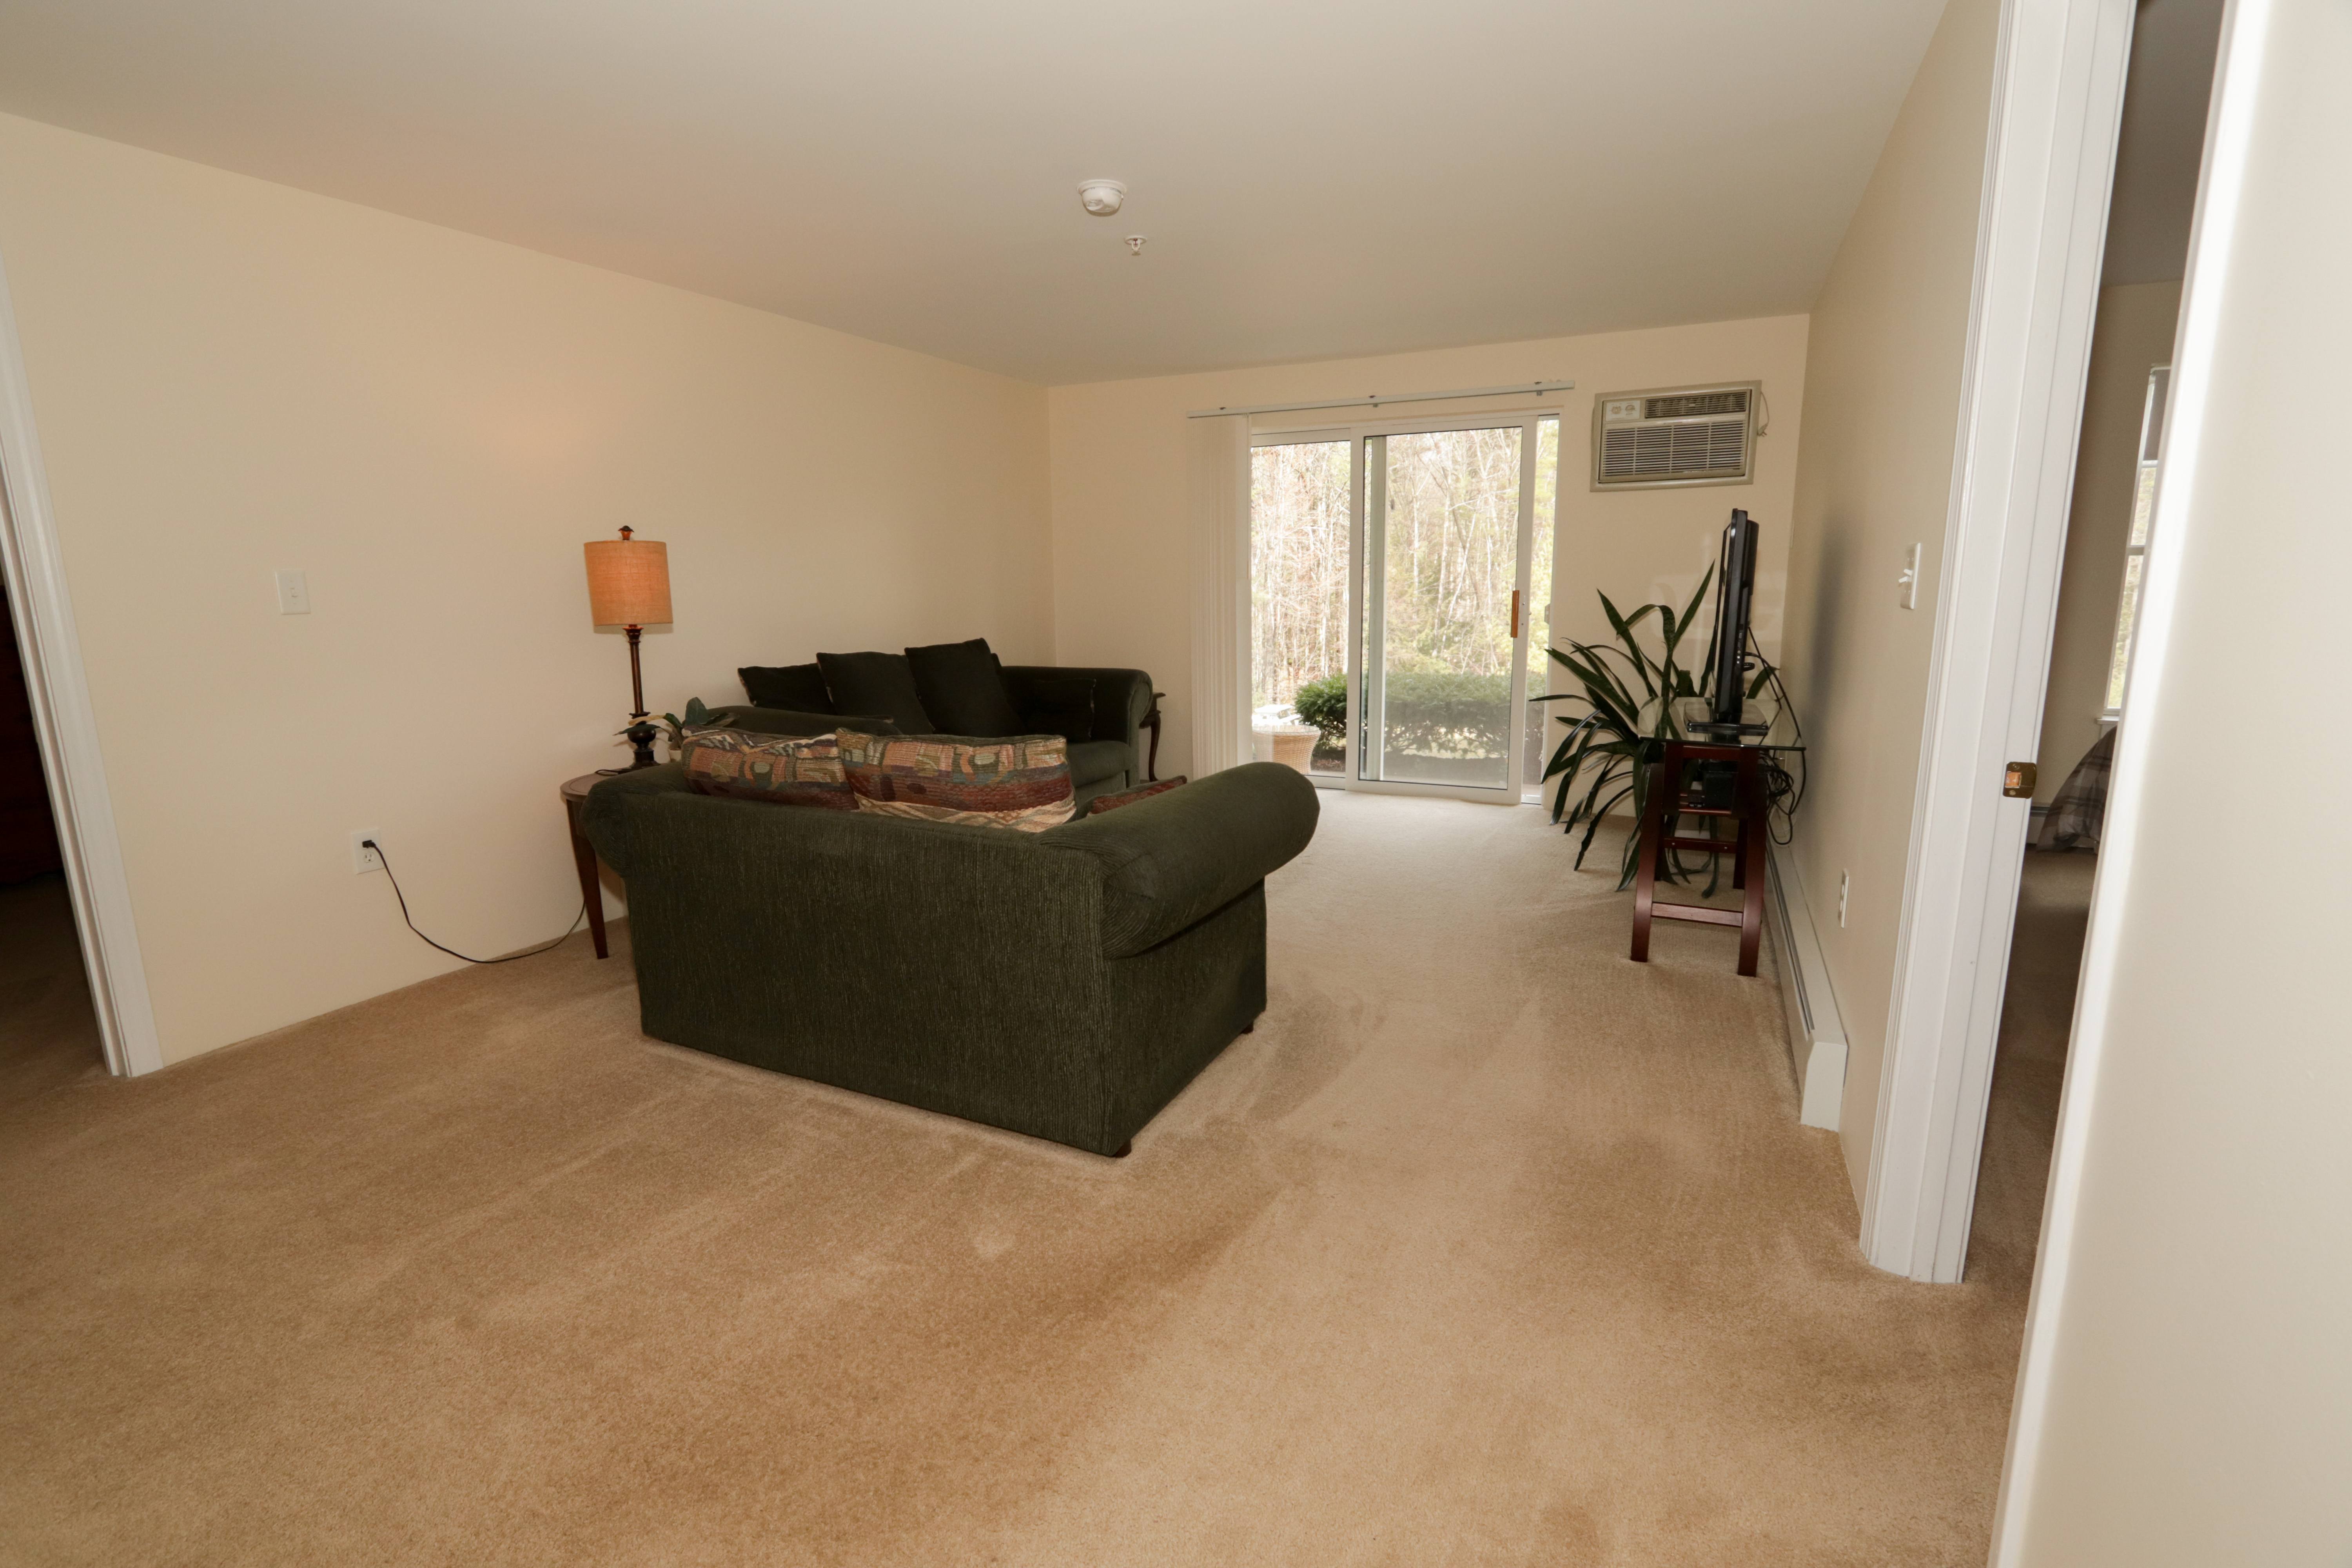 Milford condo for sale at Quarrywood Green 59 Ponemah Hill Rd Apt 2-LL2 Milford NH 03055 living room